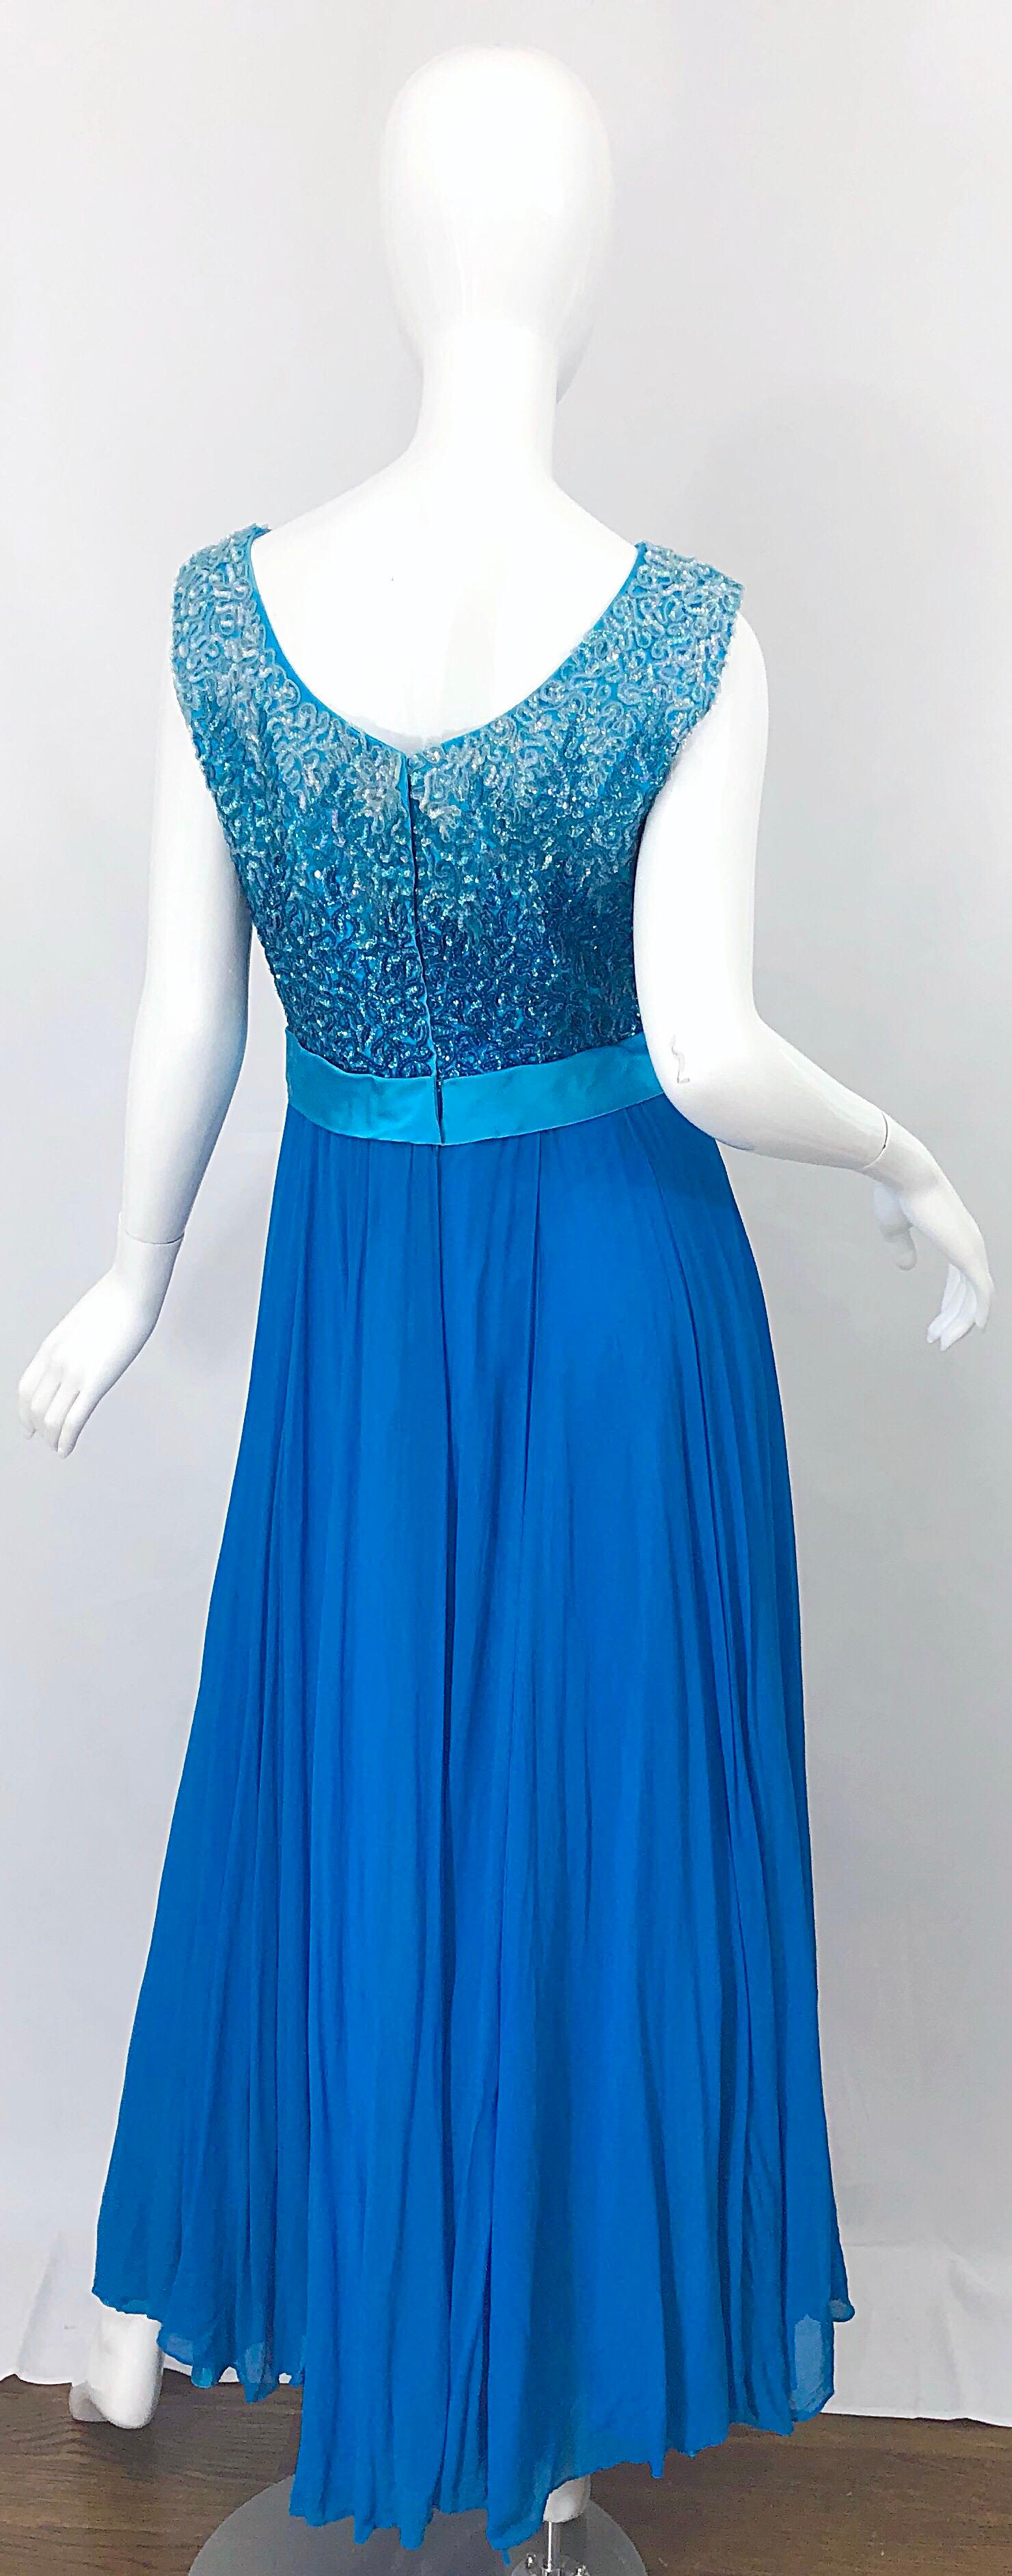 Women's 1960s Emma Domb Turquoise Blue Ombre Sequined Silk Chiffon Vintage 60s Gown For Sale